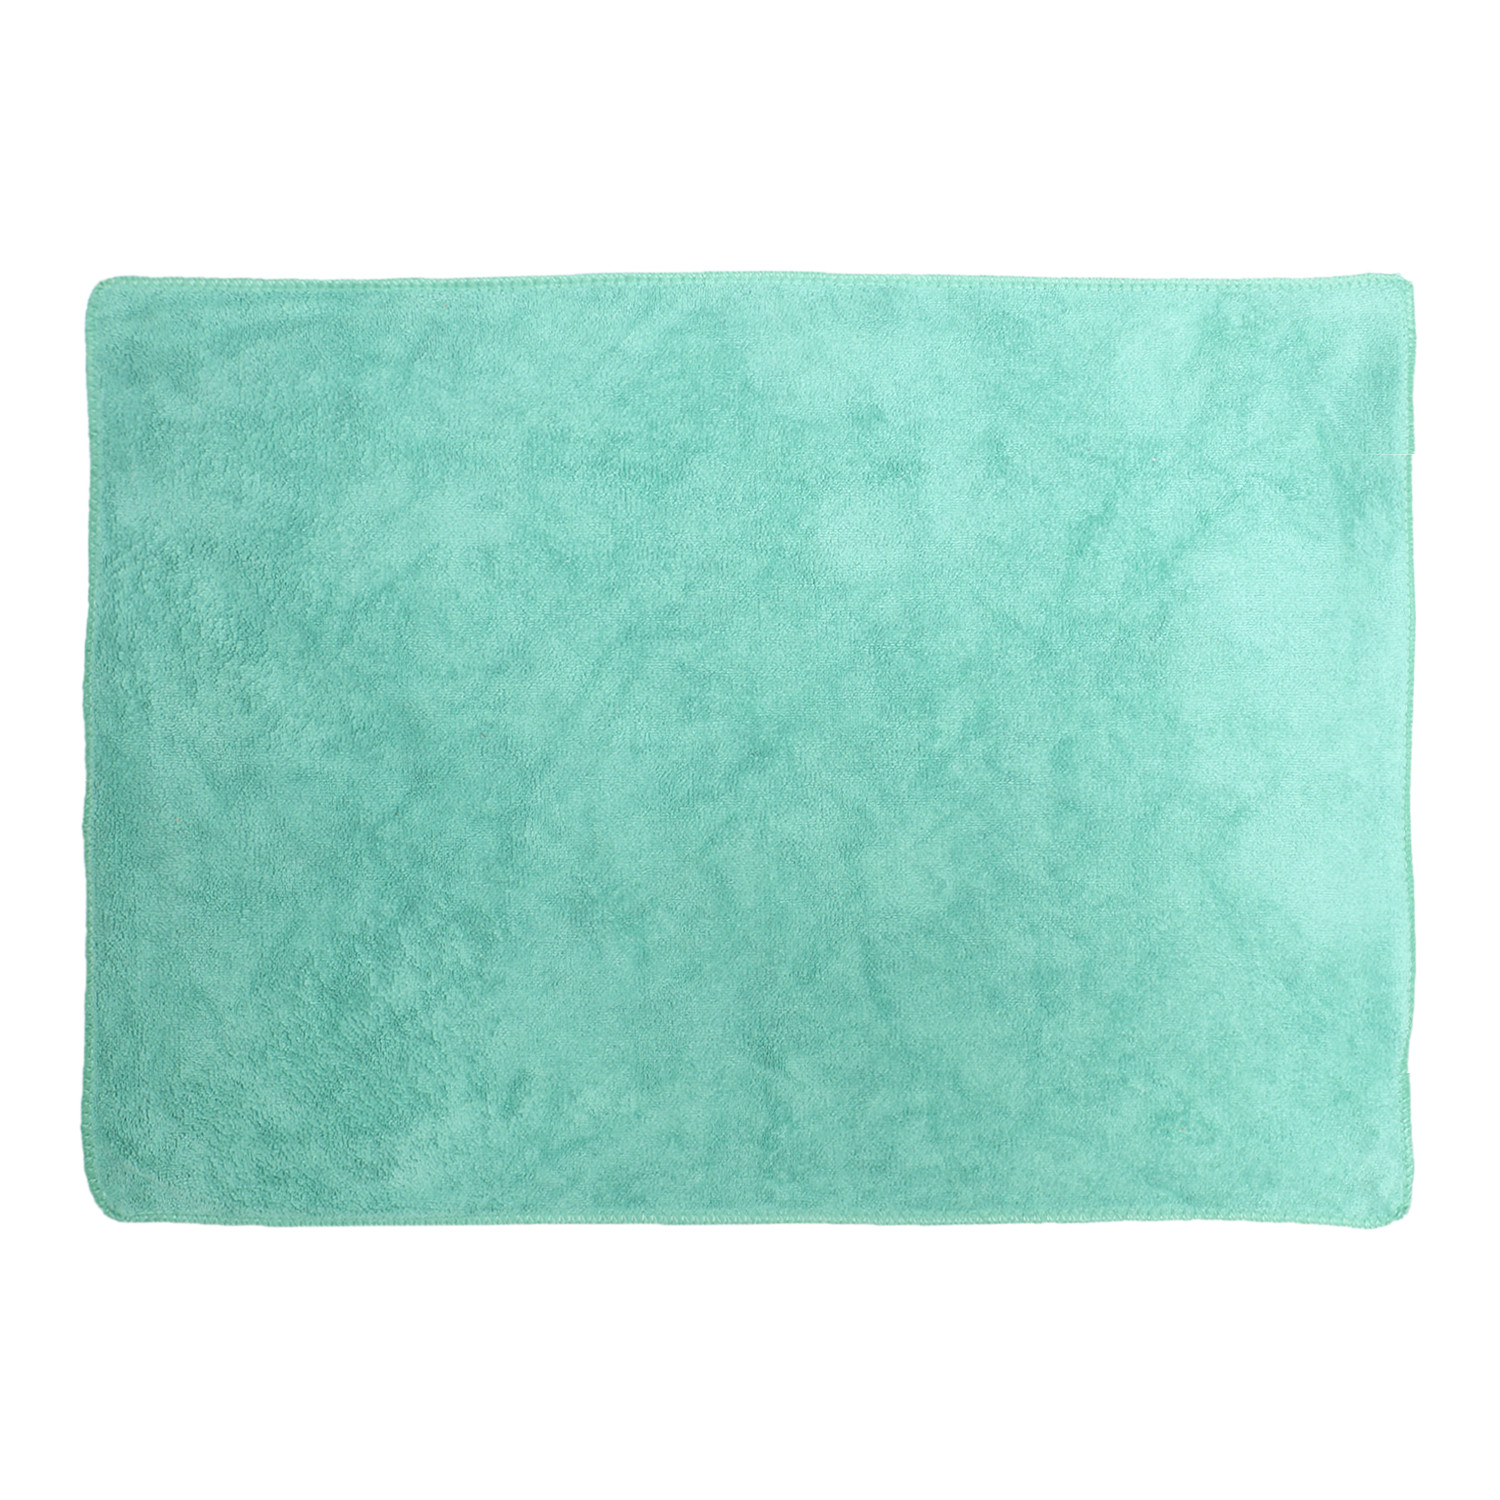 Kuber Industries Cleaning Cloths|Microfiber Highly Absorbent Wash Towels for Kitchen,Car,Window,24 x 16 Inch,Pack of 2 (Green & Blue)